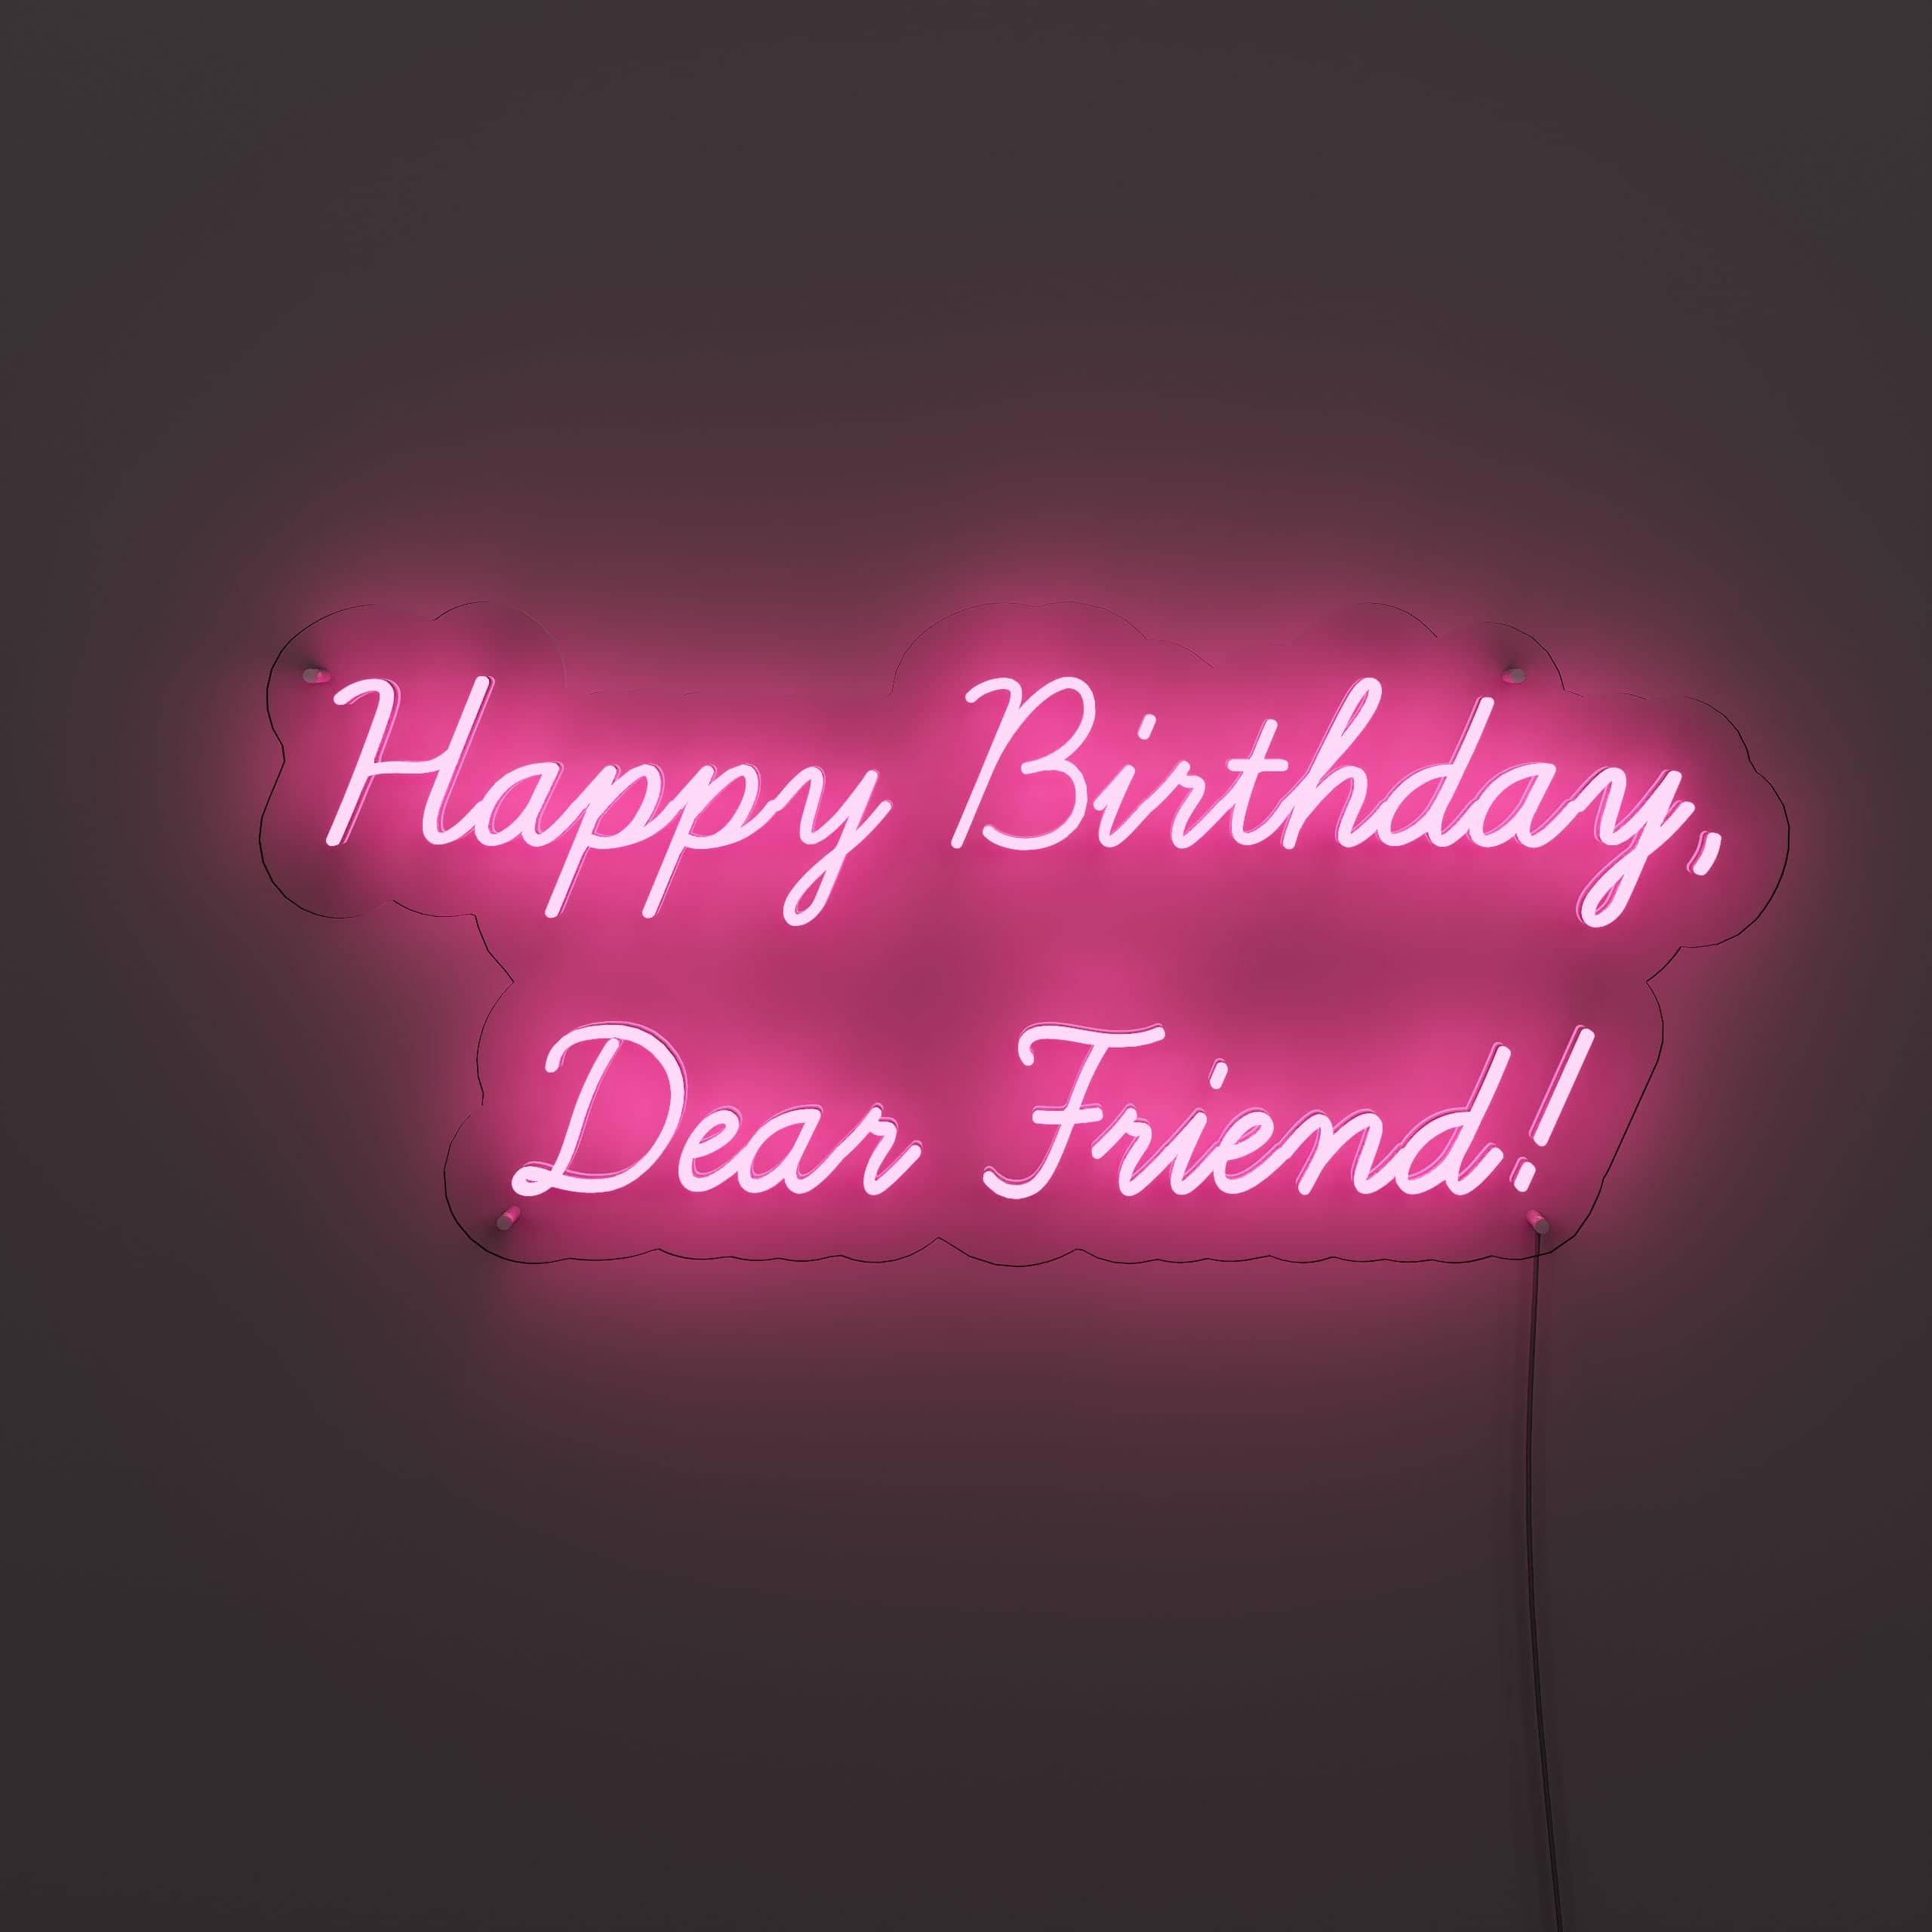 cheers-to-a-friend-who-brings-so-much-joy!-neon-sign-lite